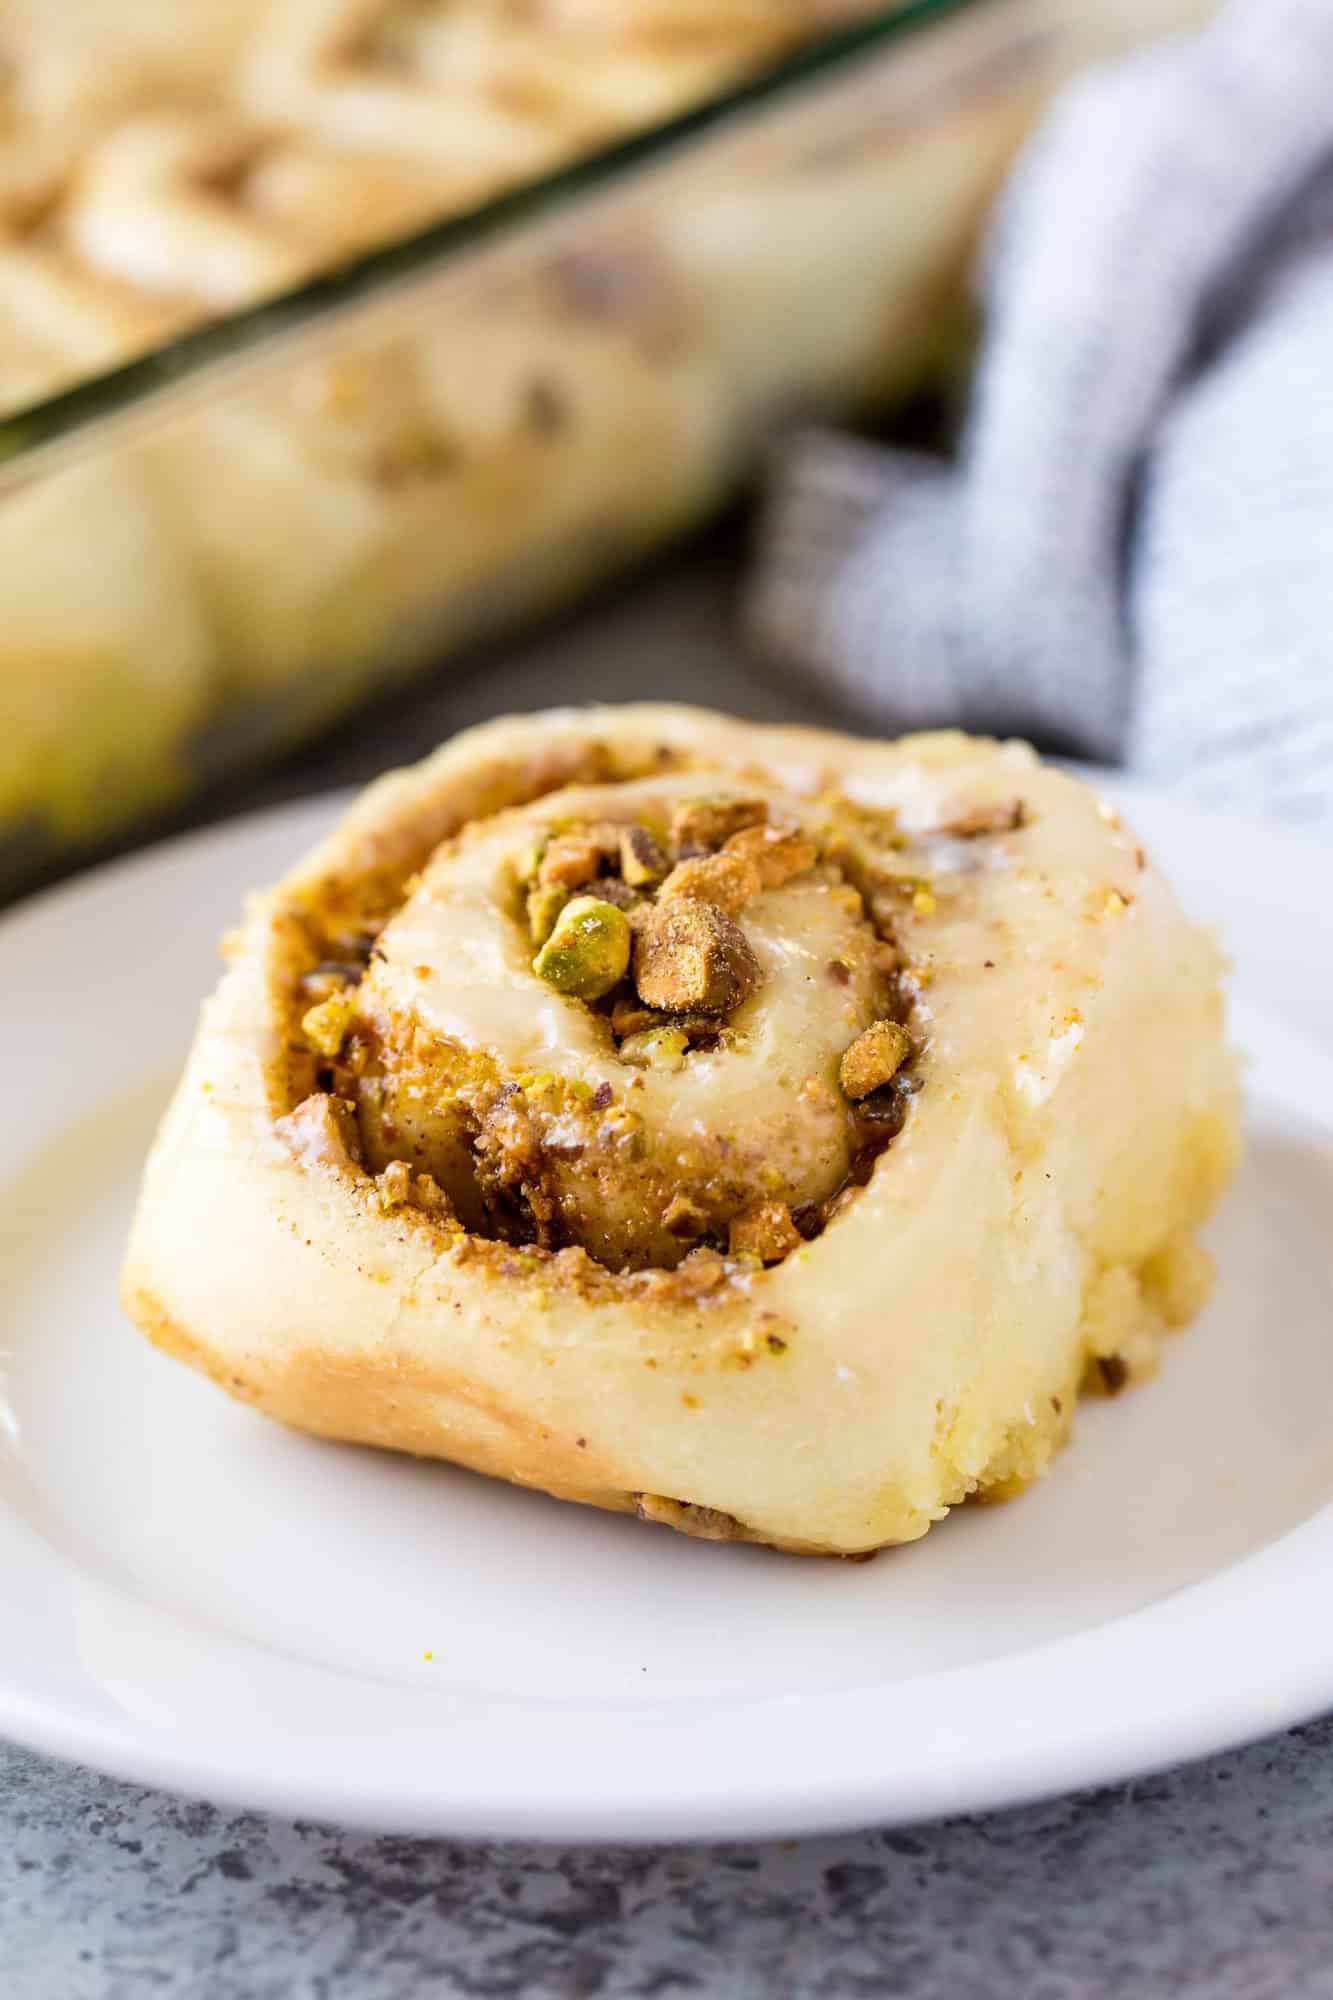 Baklava Cinnamon Rolls have all the flavors you love from traditional baklava wrapped up in a soft and gooey cinnamon roll. You'll love that pistachio nut filling and the lemon honey glaze.